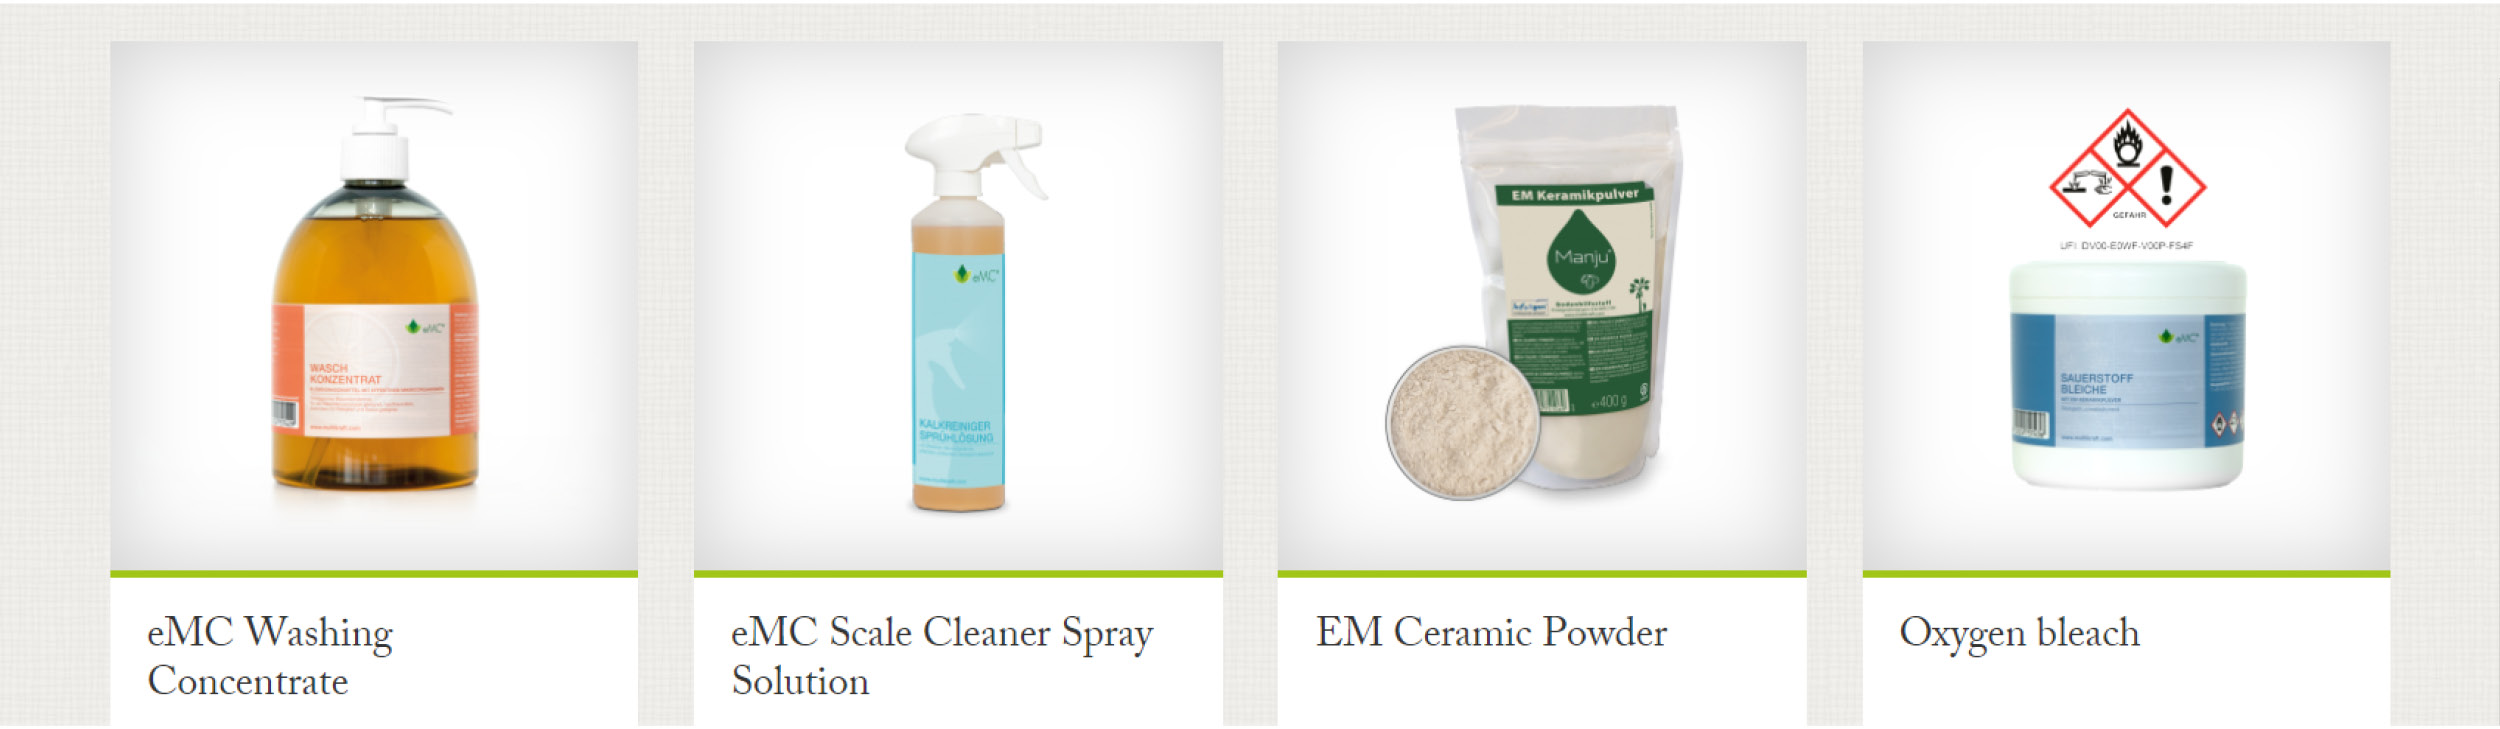 Detergents & Bio-Cosmetics Products From Effective Microorganisms-Mar-31-2022-07-03-17-02-AM